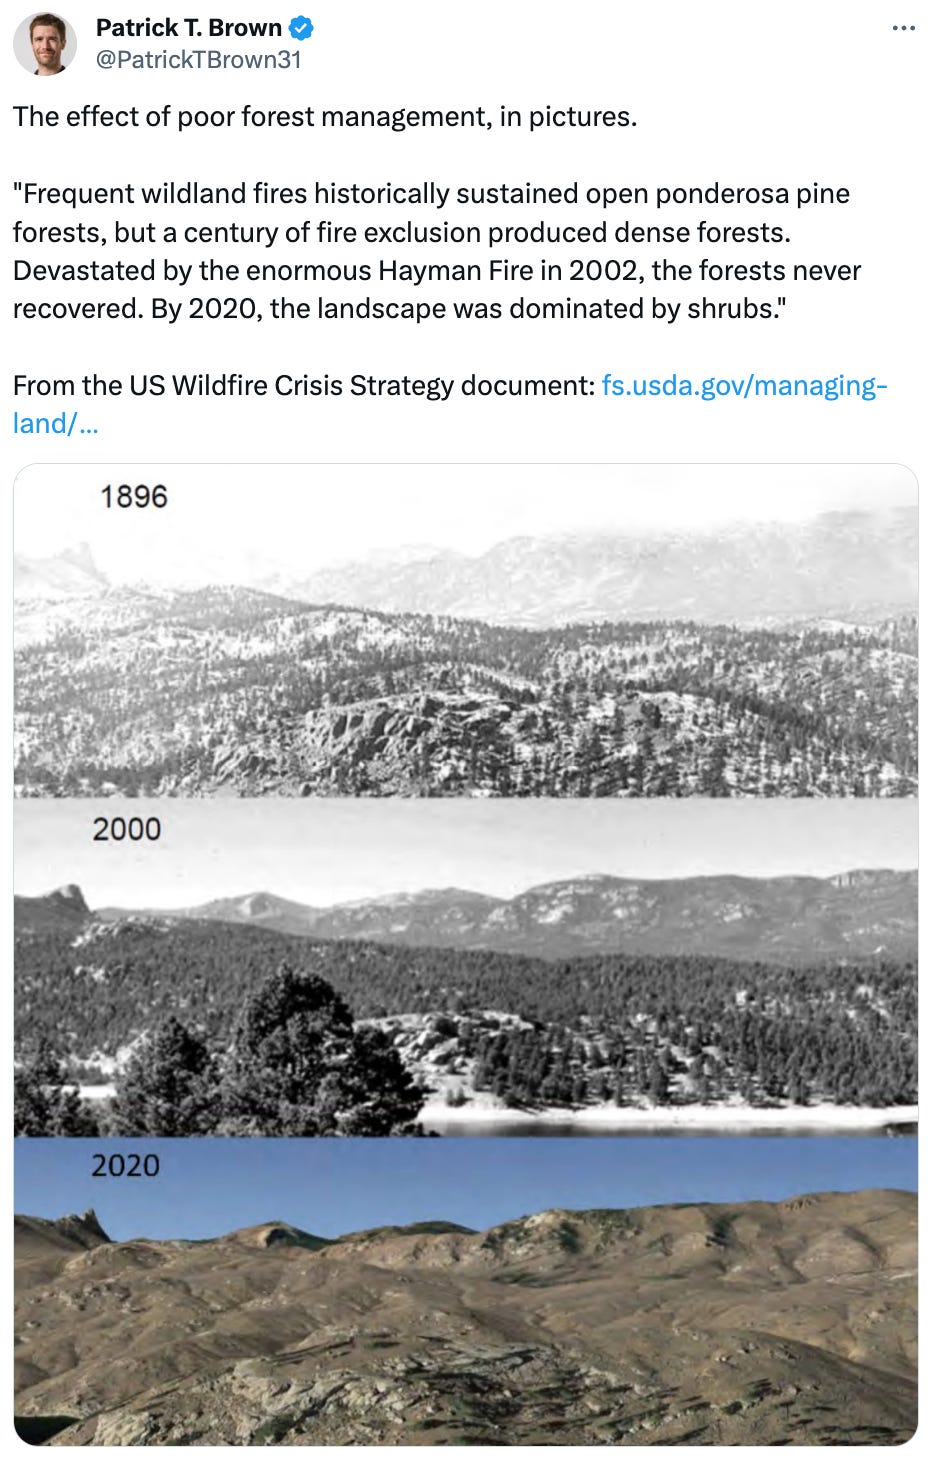  See new posts Conversation Patrick T. Brown @PatrickTBrown31 The effect of poor forest management, in pictures.   "Frequent wildland fires historically sustained open ponderosa pine forests, but a century of fire exclusion produced dense forests. Devastated by the enormous Hayman Fire in 2002, the forests never recovered. By 2020, the landscape was dominated by shrubs."  From the US Wildfire Crisis Strategy document: https://fs.usda.gov/managing-land/wildfire-crisis